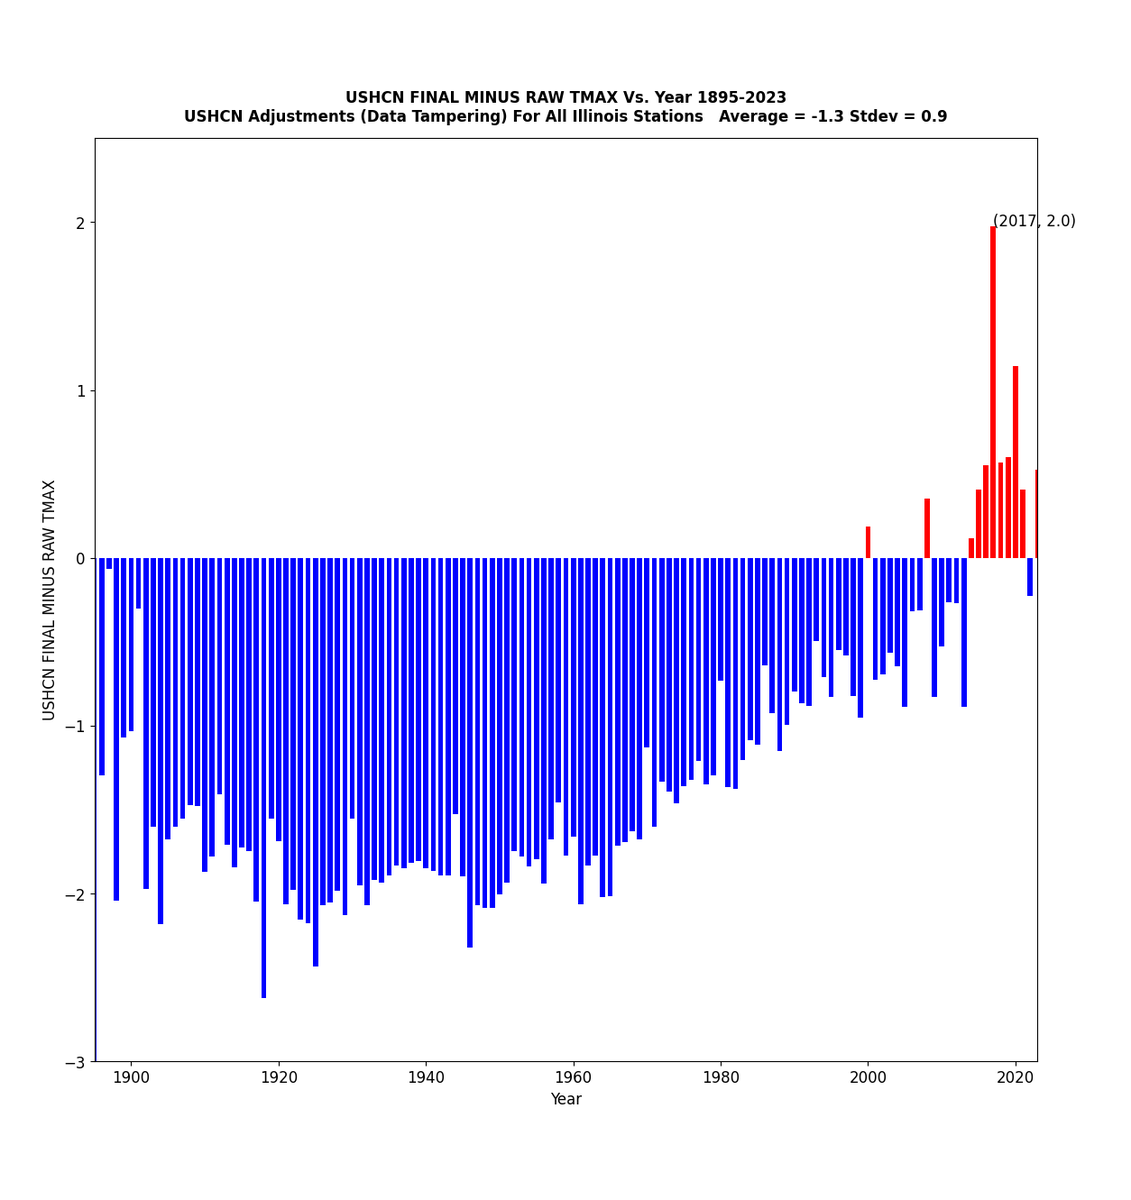 The US isn't warming, but the US government has a warming agenda. So government agencies @NOAA and @NASA tamper with data to create the appearance of a warming trend. Older temperatures are cooled, and recent temperatures are warmed. The #ClimateScam has nothing to do with…